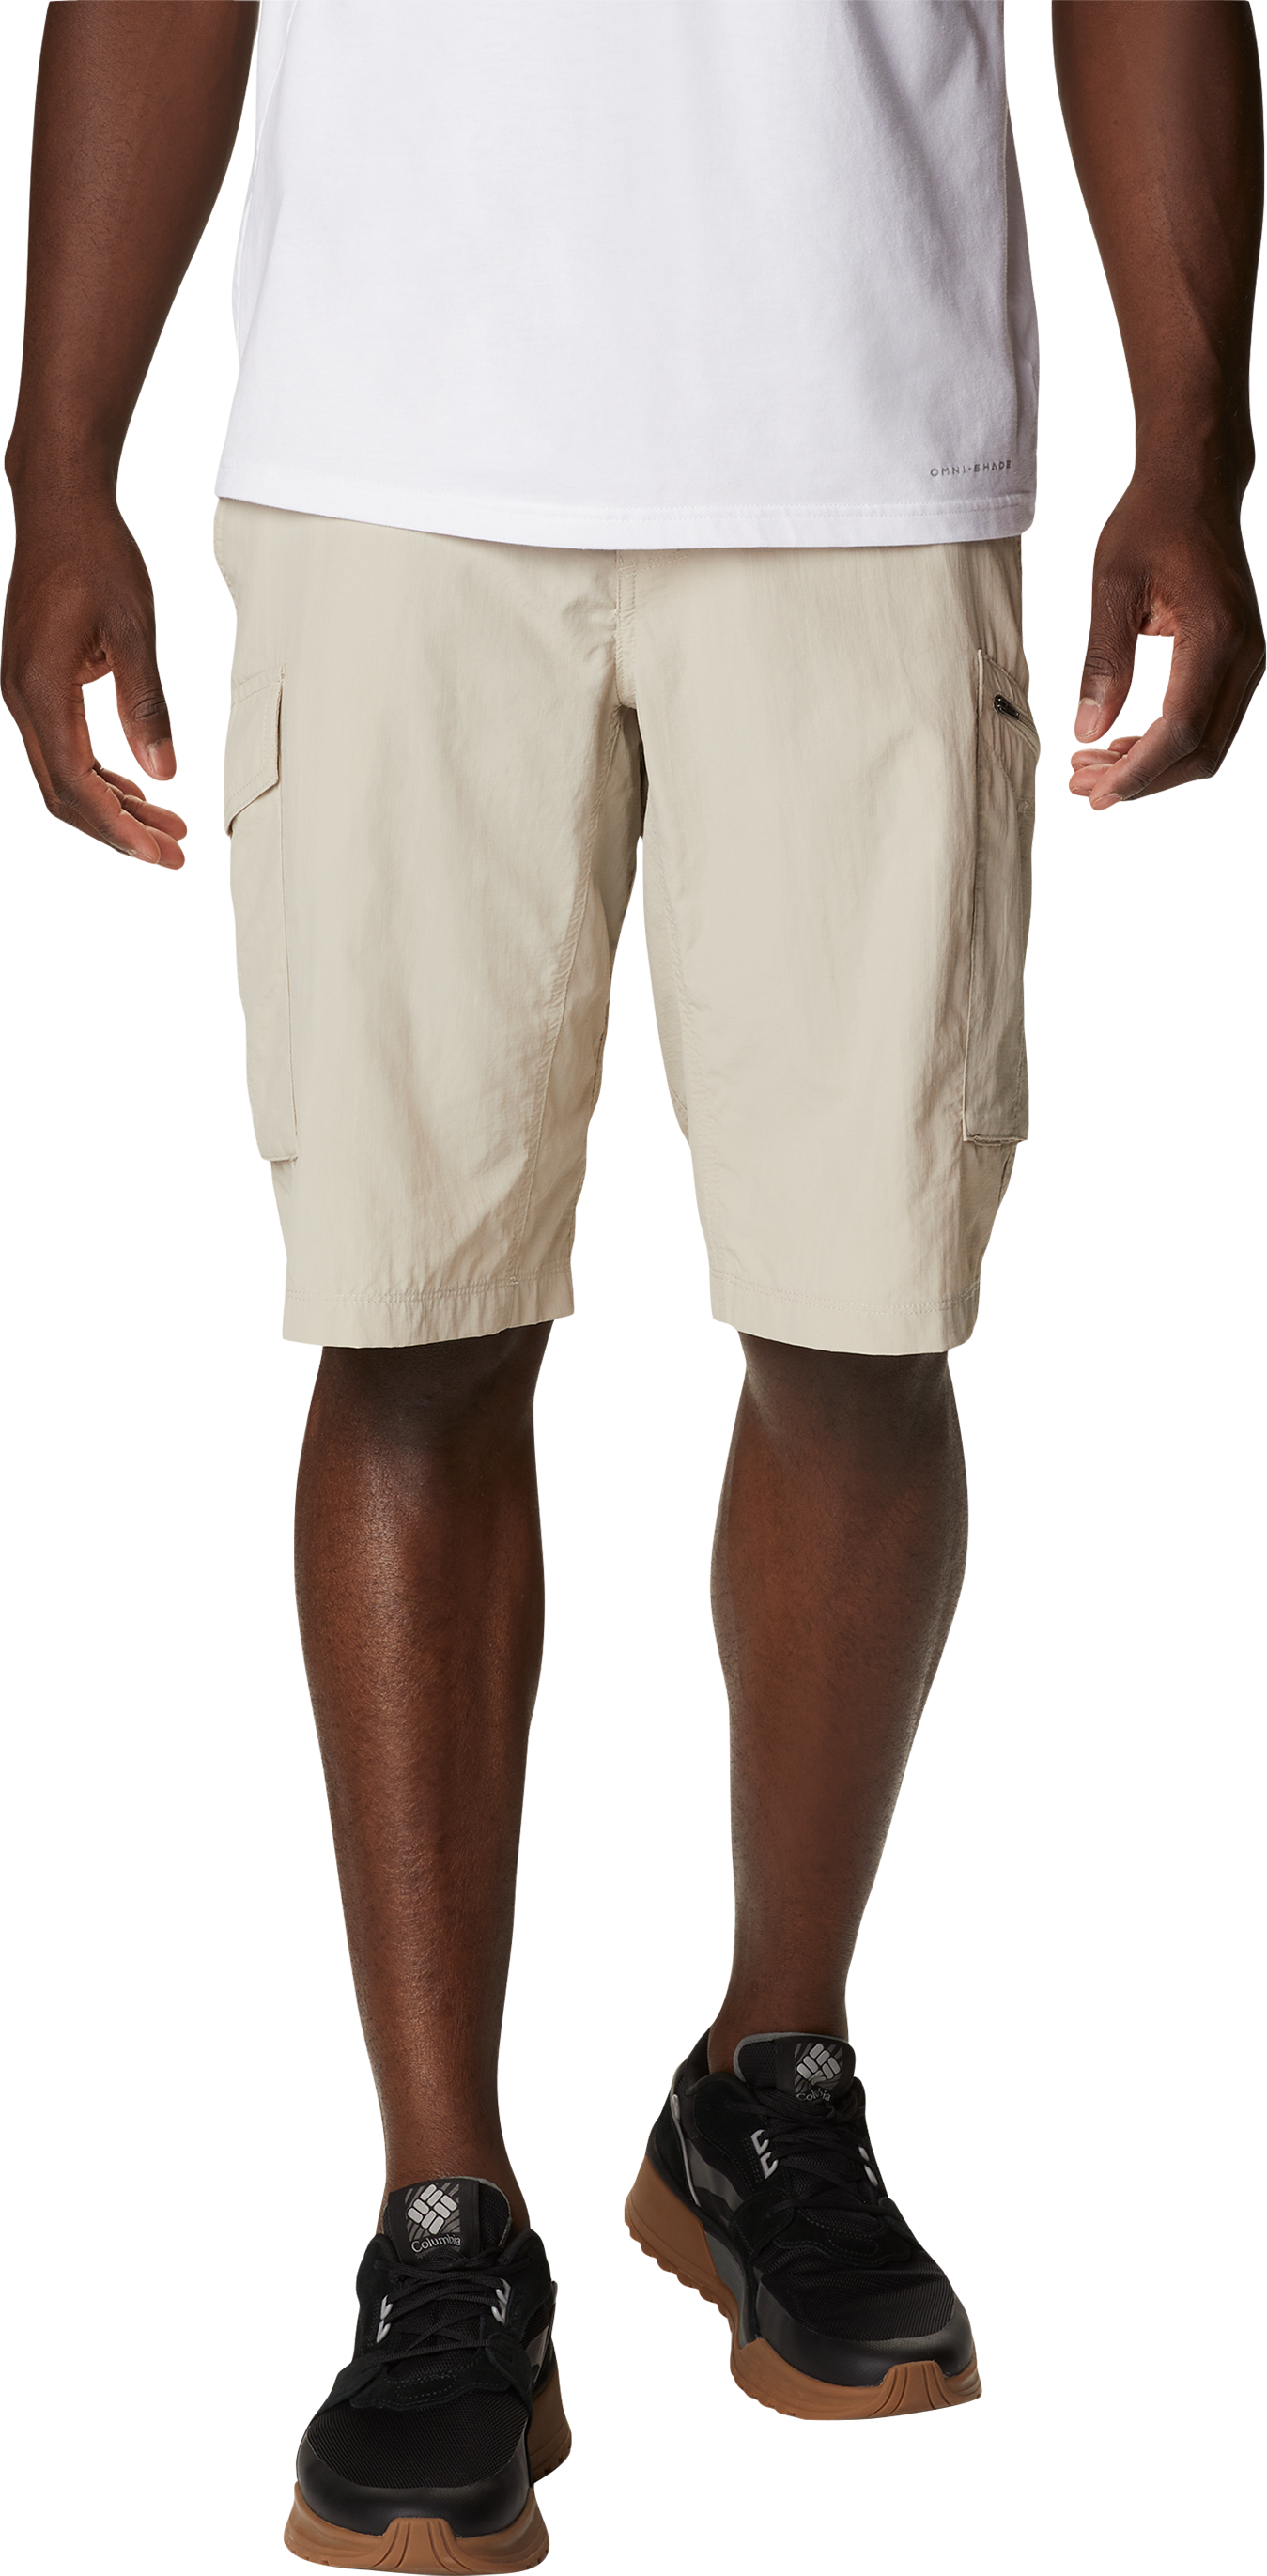 Columbia Polyester Black Shorts for Men for sale